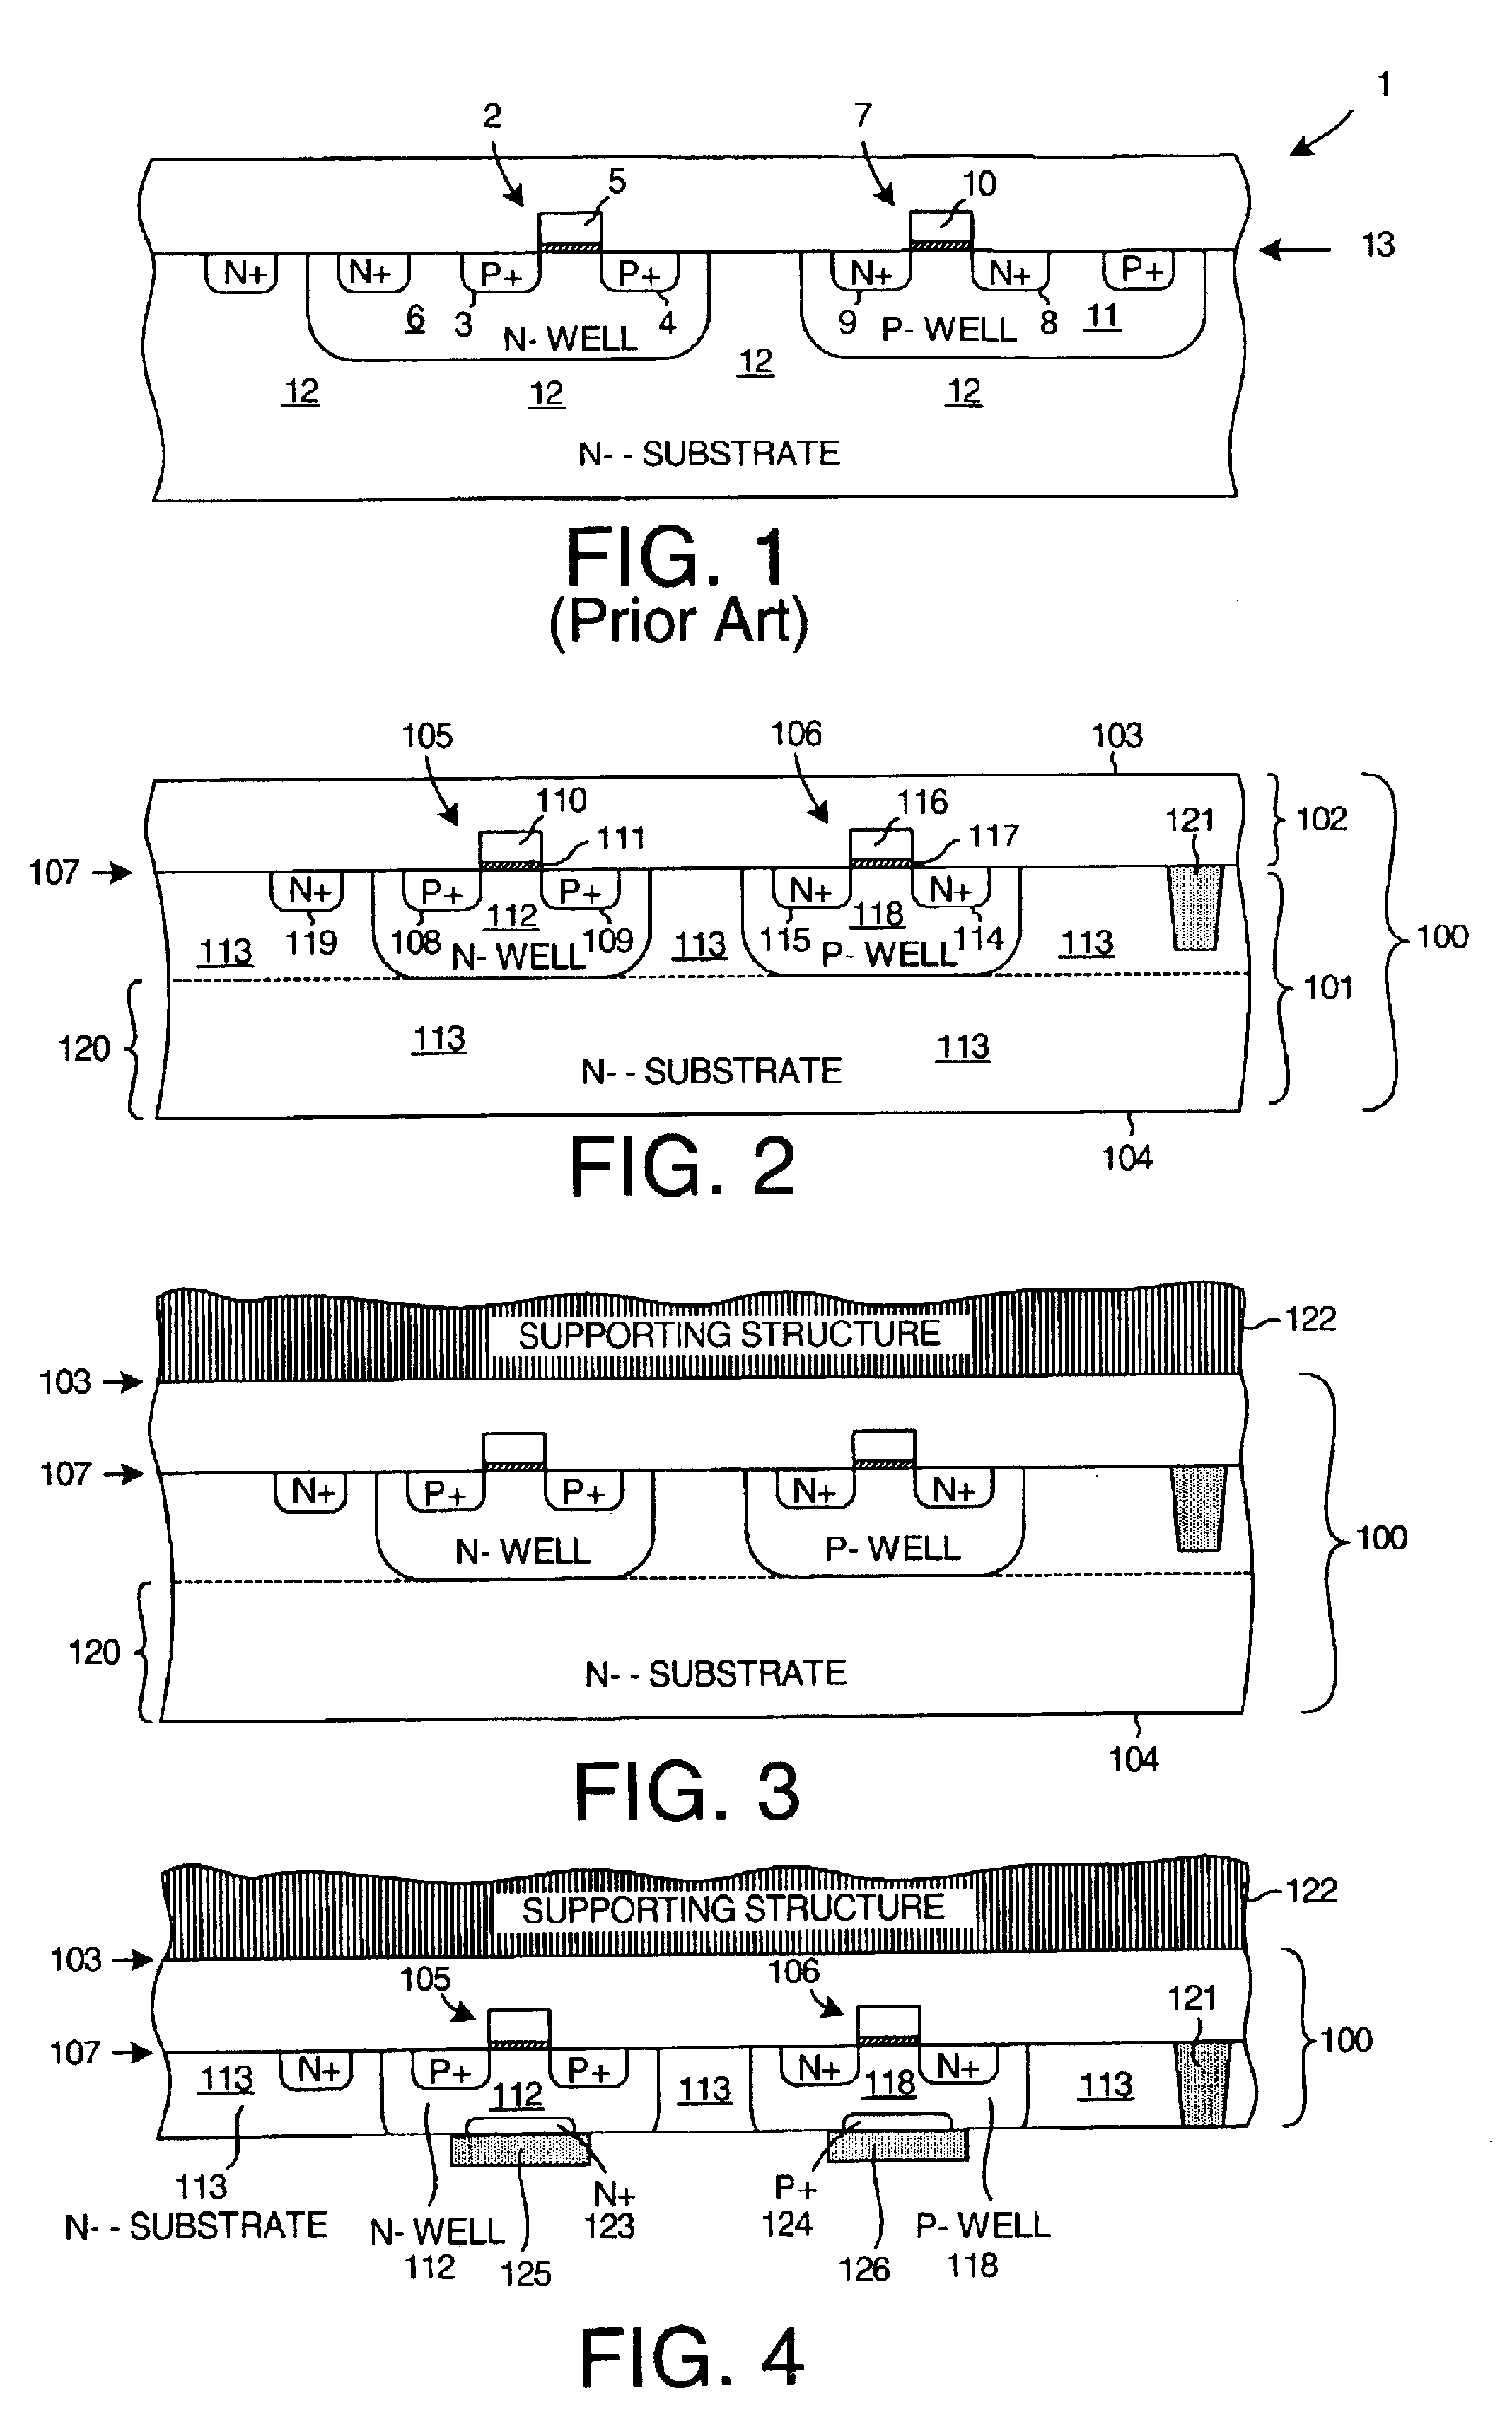 Semiconductor wafer with well contacts on back side